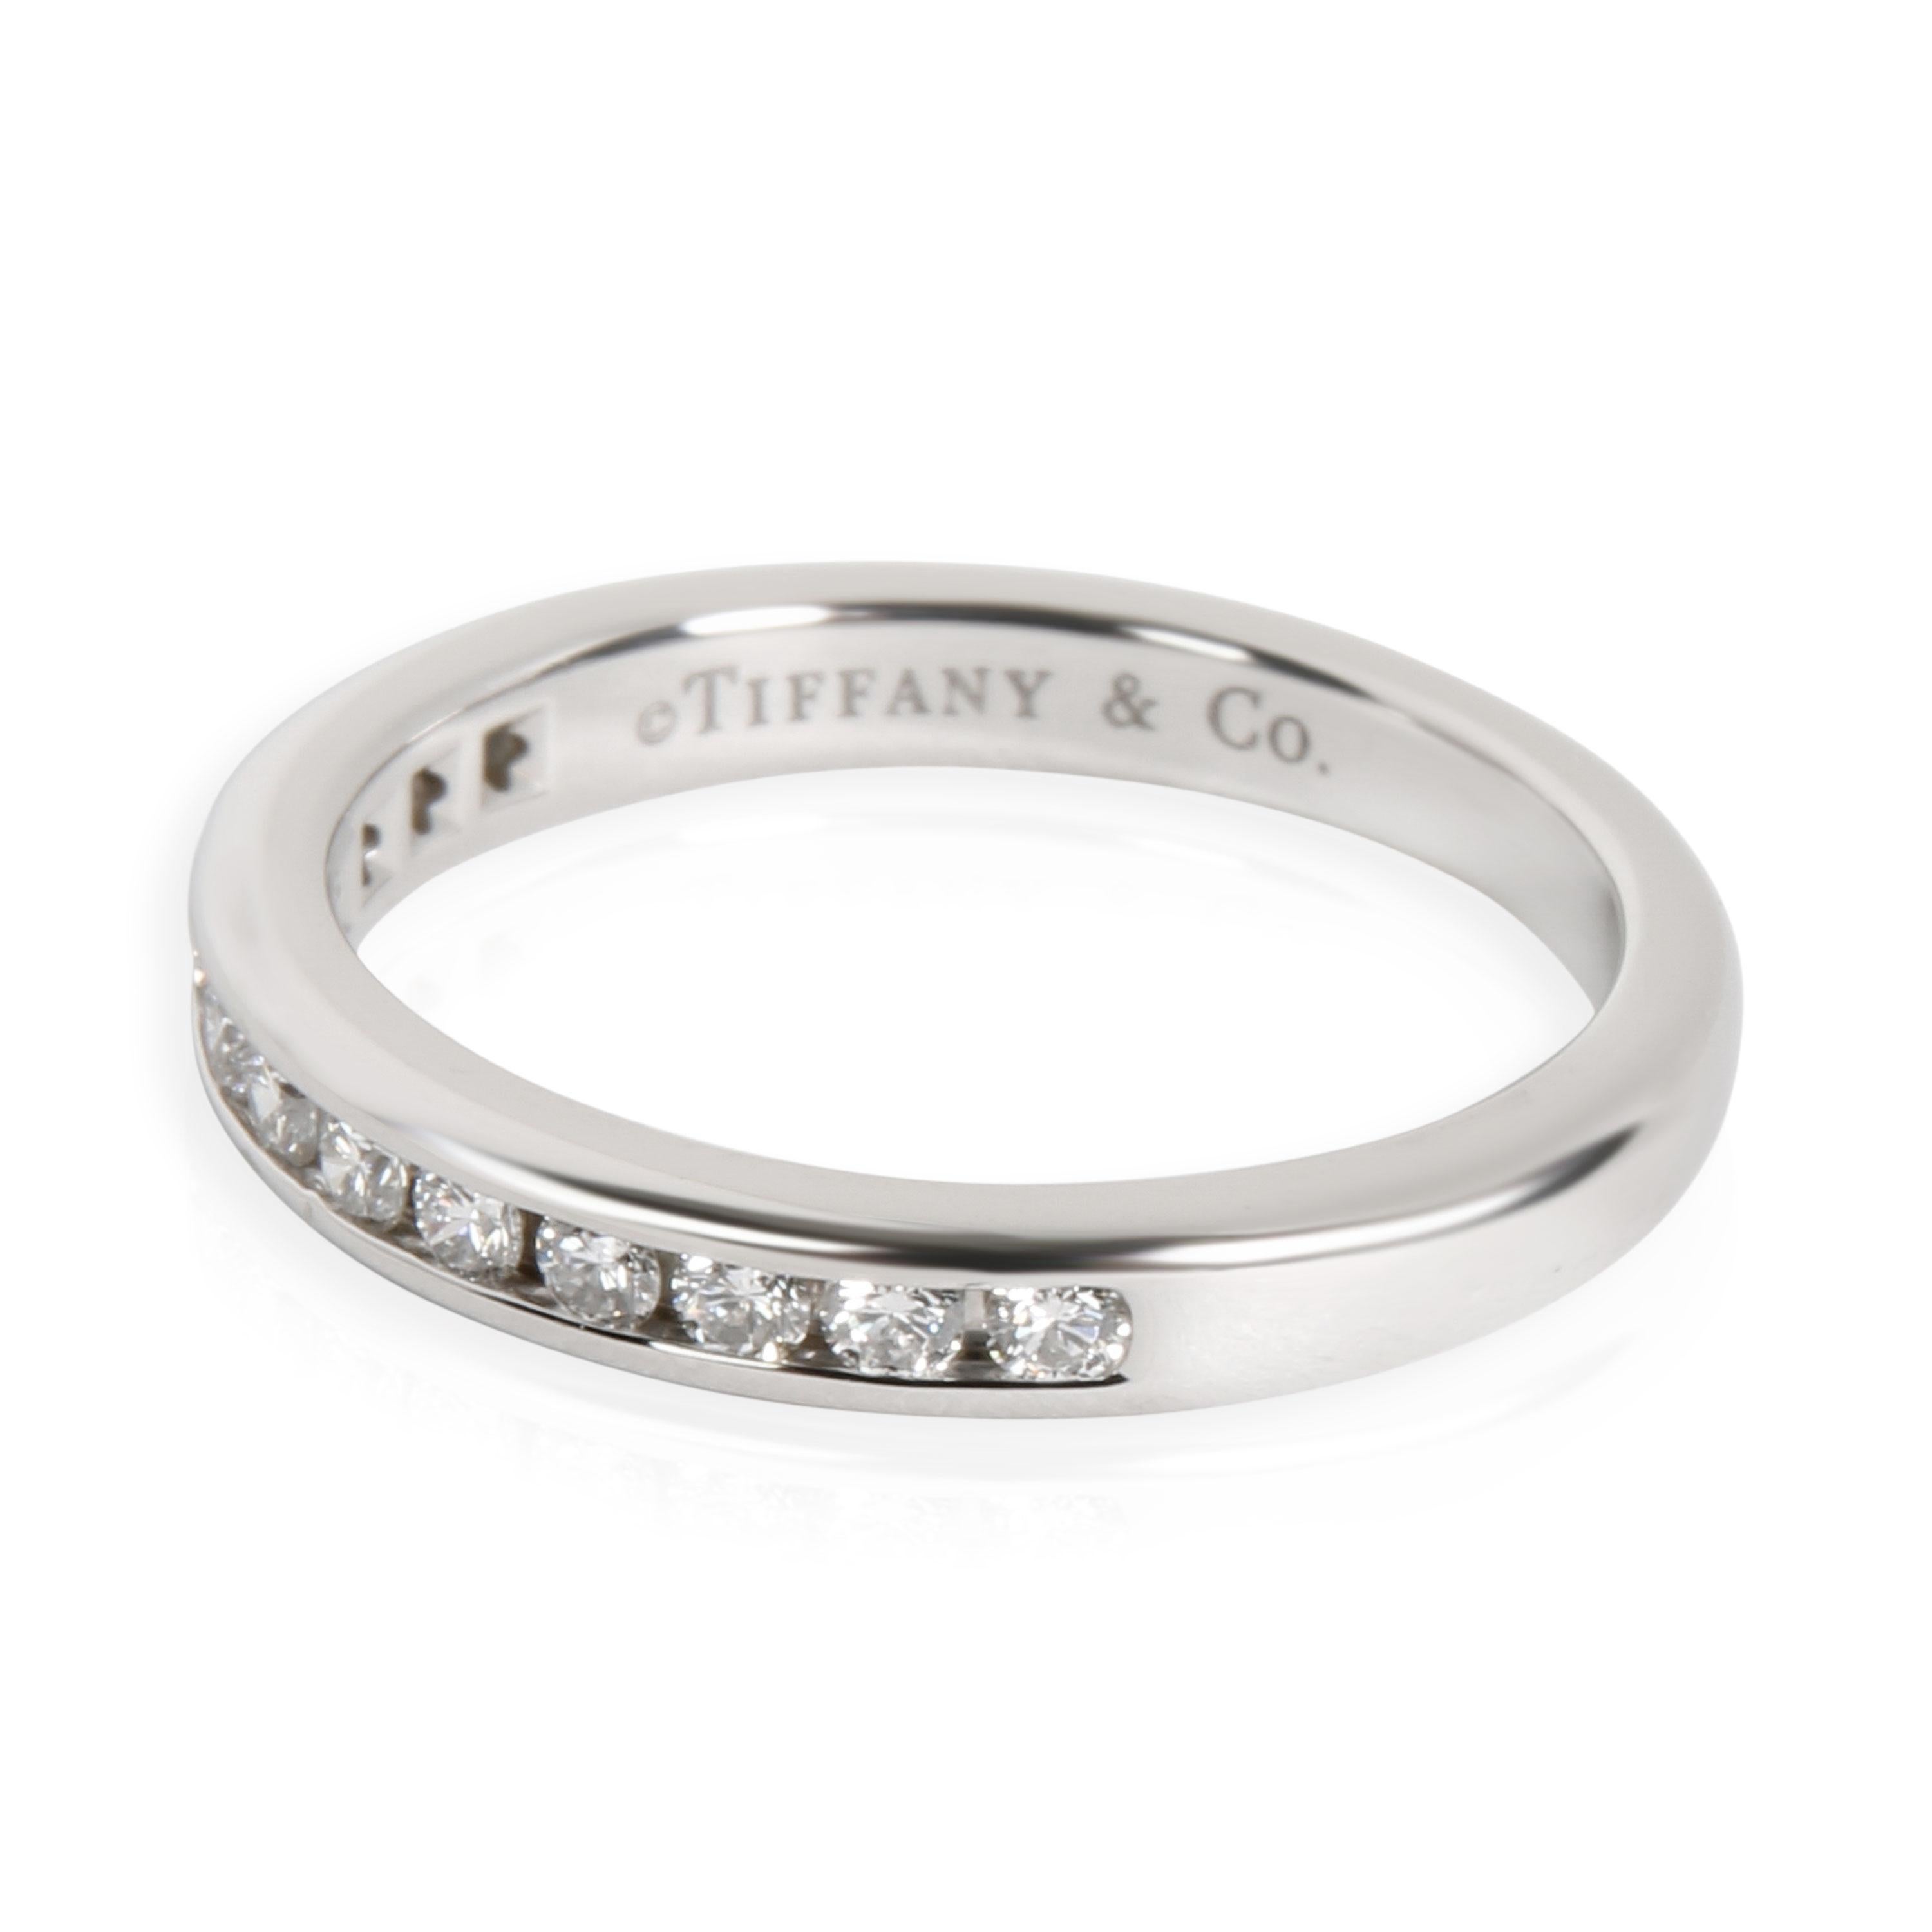 Tiffany & Co. Channel Set Diamond Wedding Band in Platinum 0.24 CTW In Excellent Condition For Sale In New York, NY